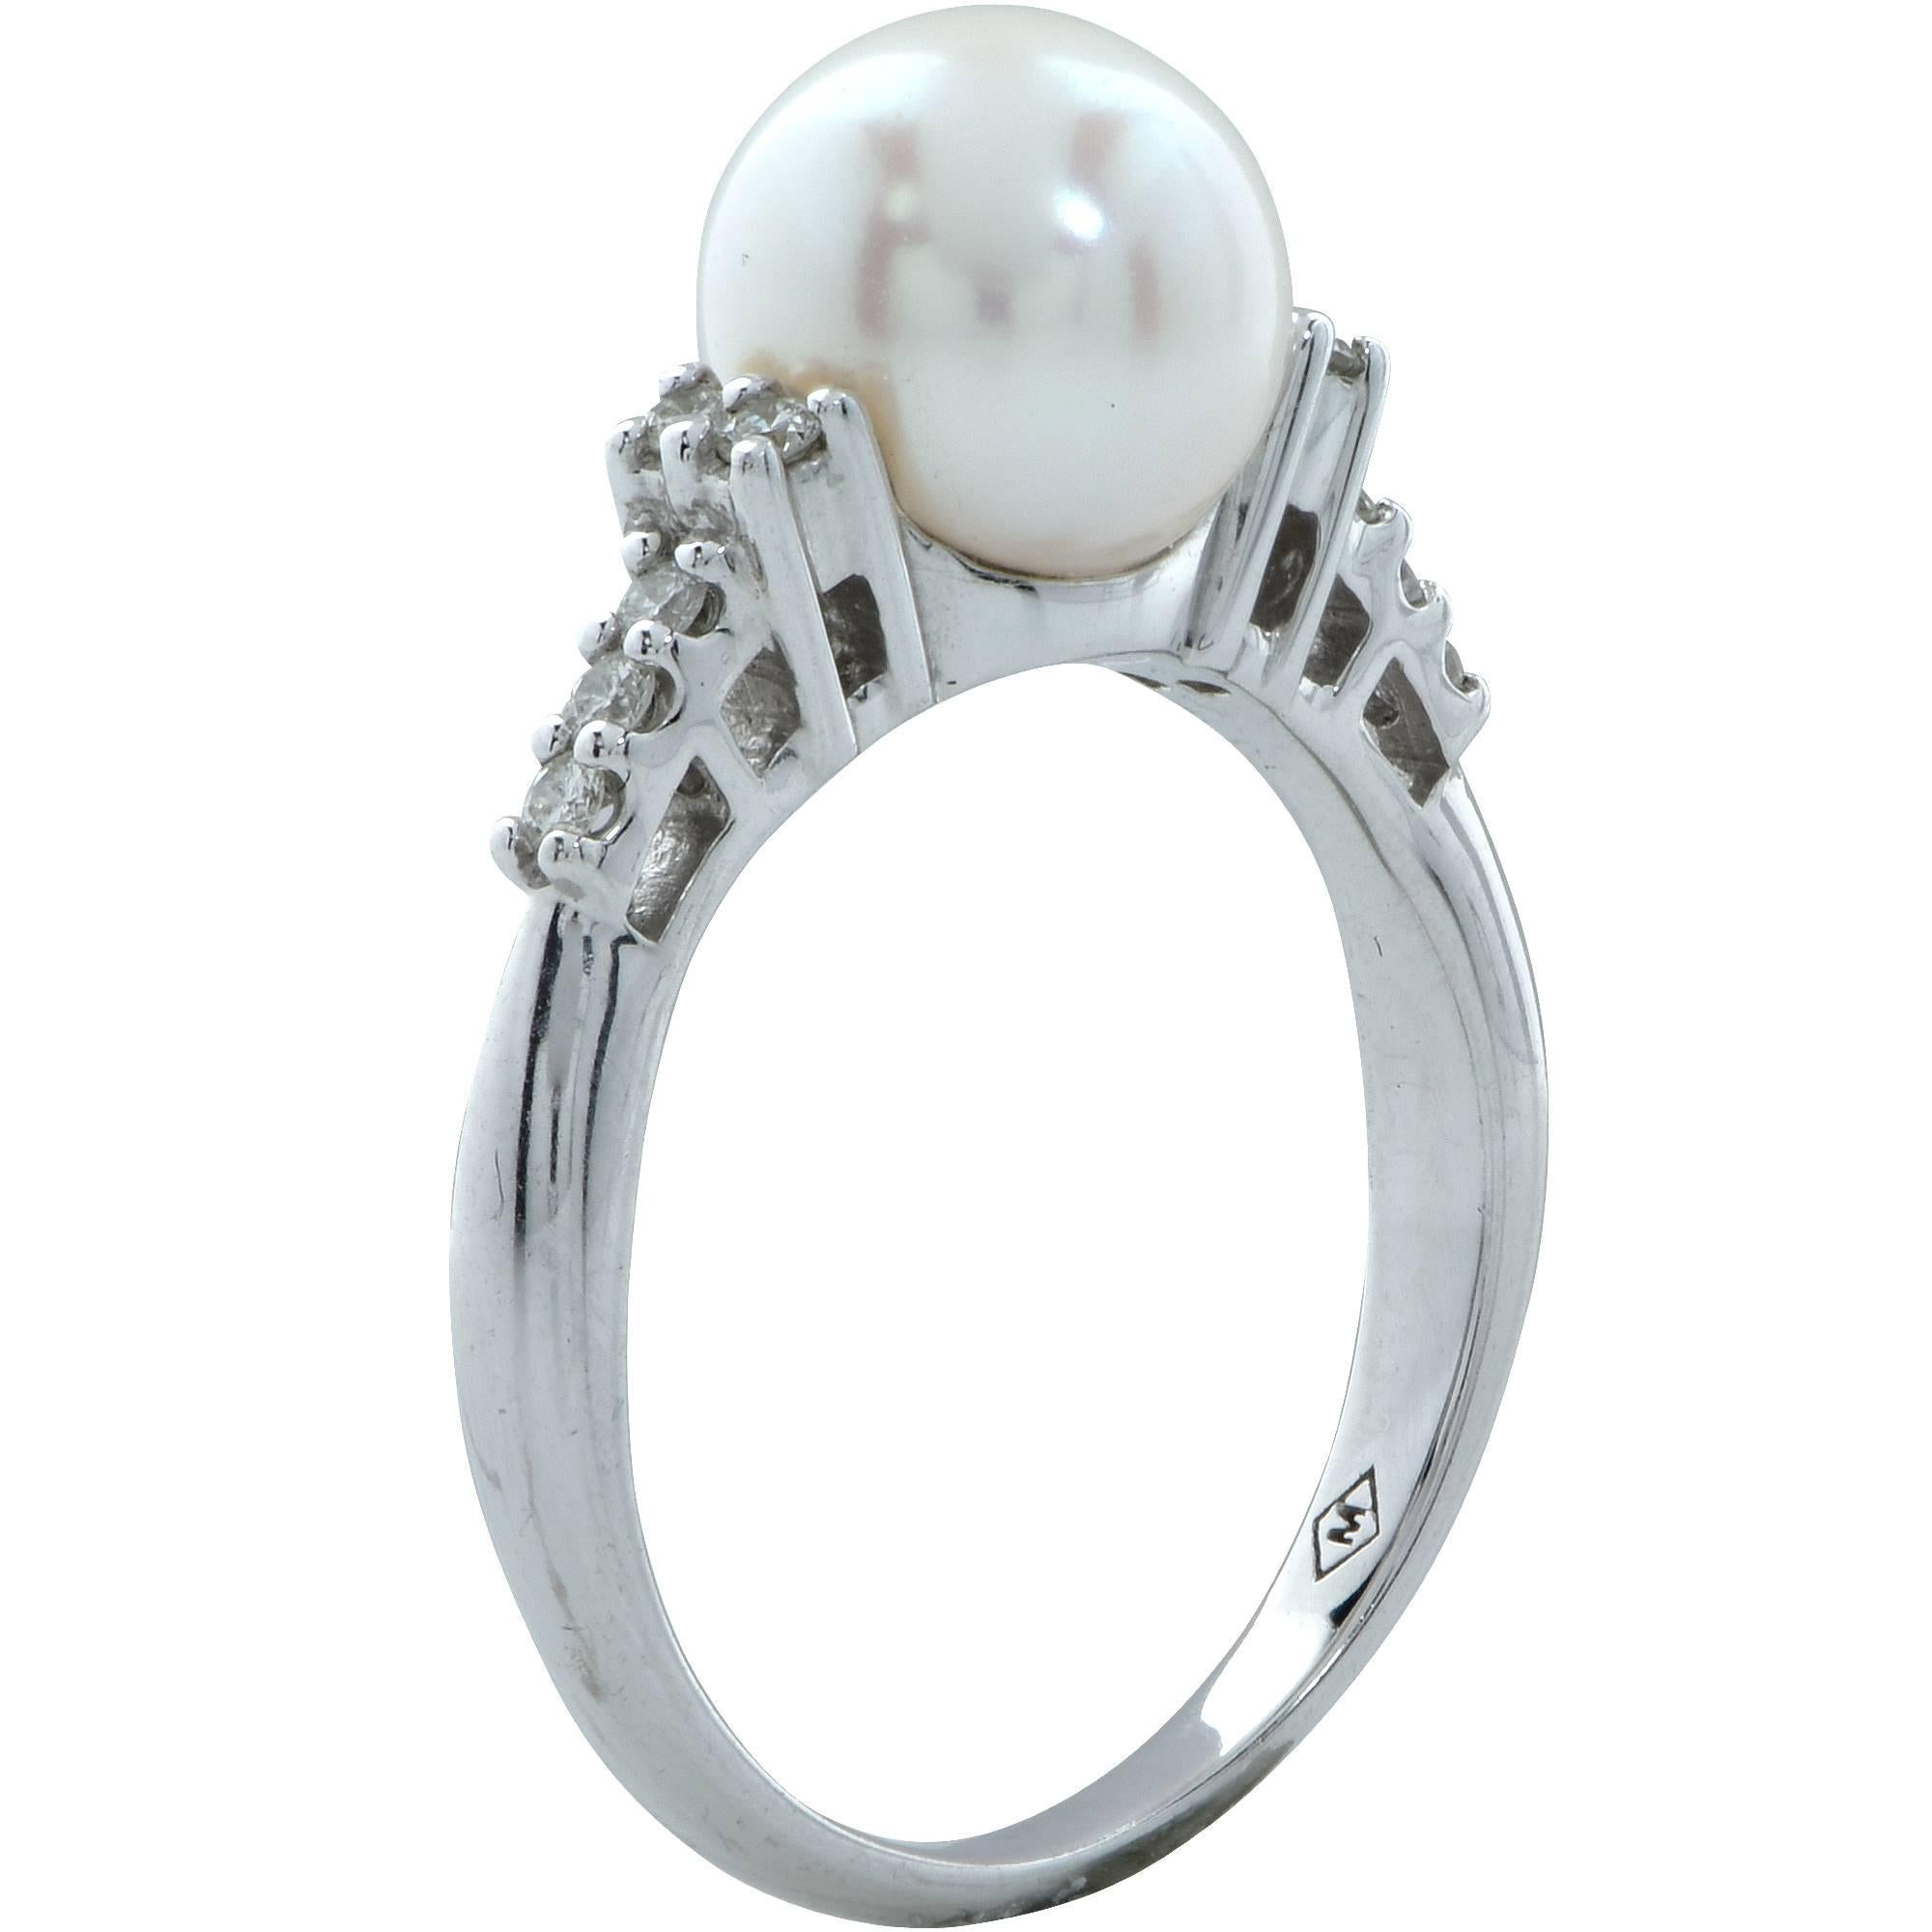 14k white gold ring featuring a 8.6mm pearl accented by 10 round brilliant cut diamonds weighing approximately .20cts total, G color VS clarity.

The ring is a size 7 and can be sized up or down.
Measurements are available upon request.
It is